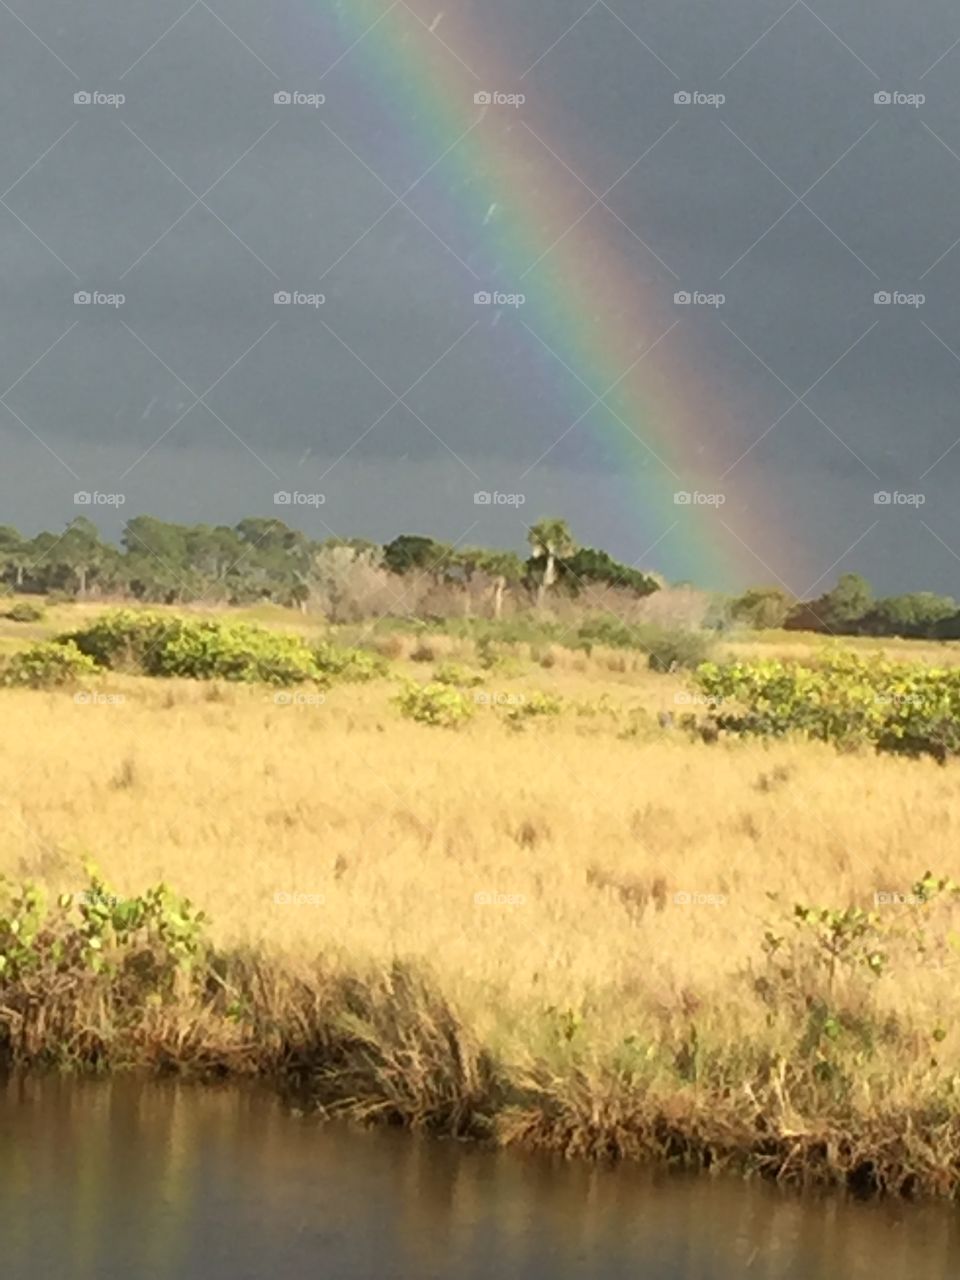 Rainbow in the National Park